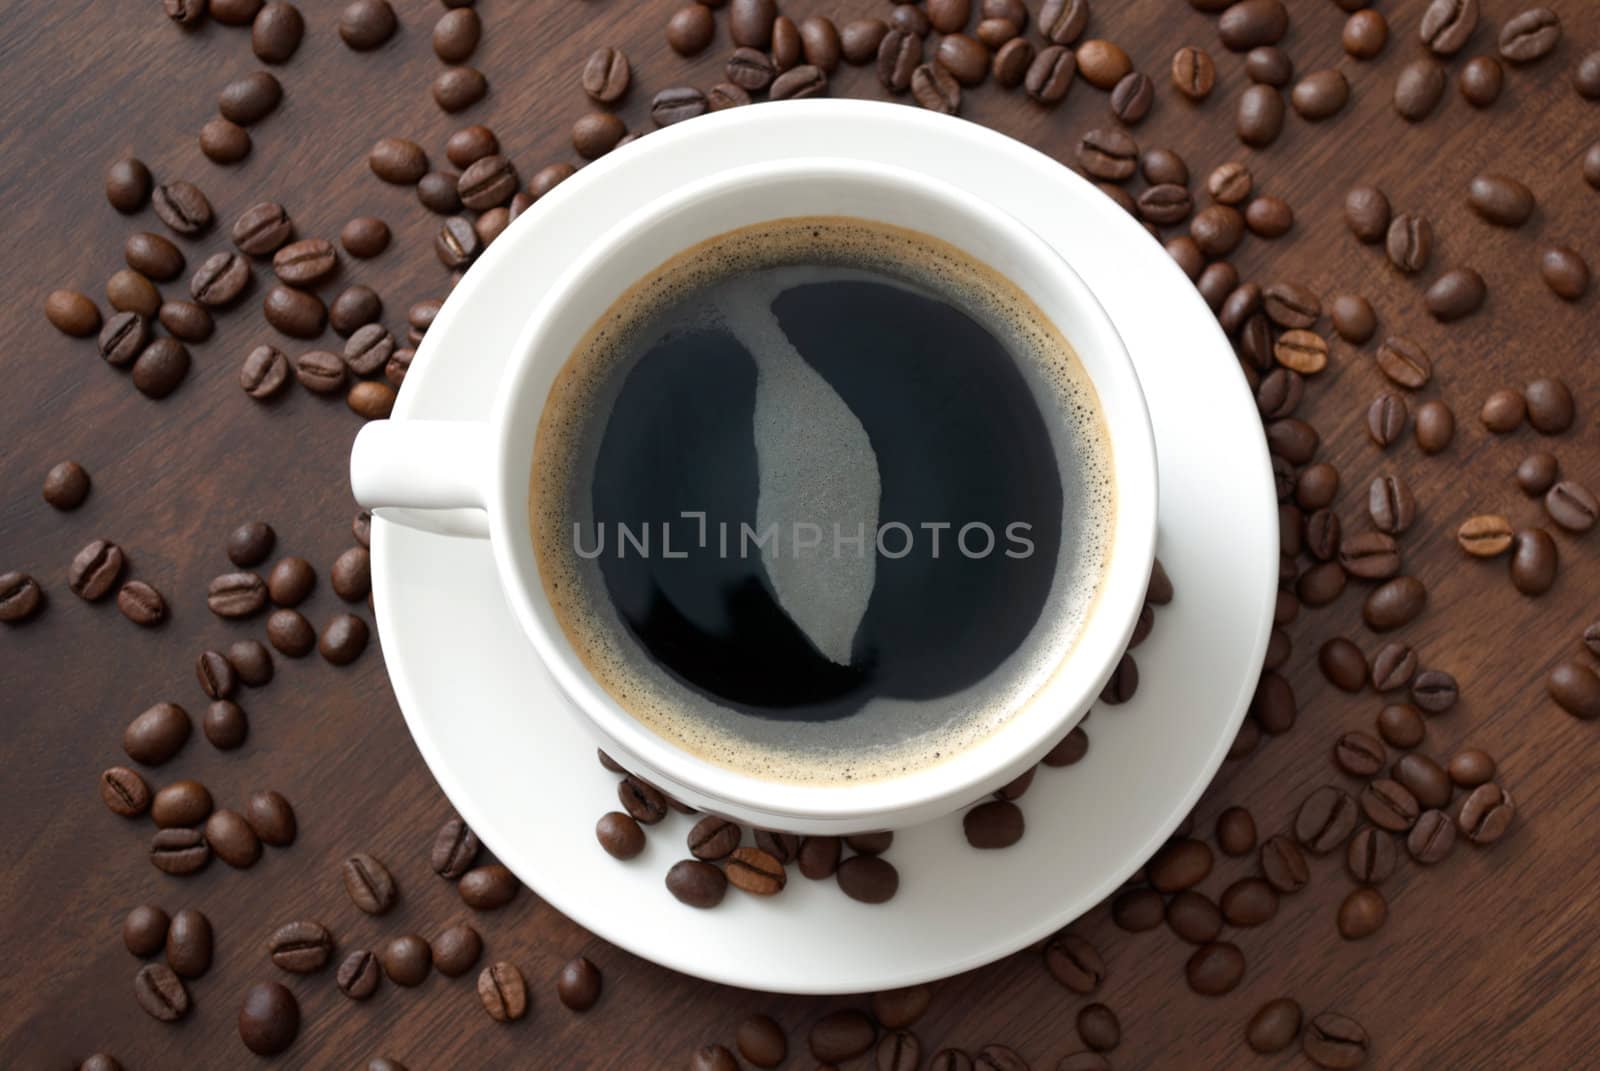 A cup of hot coffee on the table with coffee beans